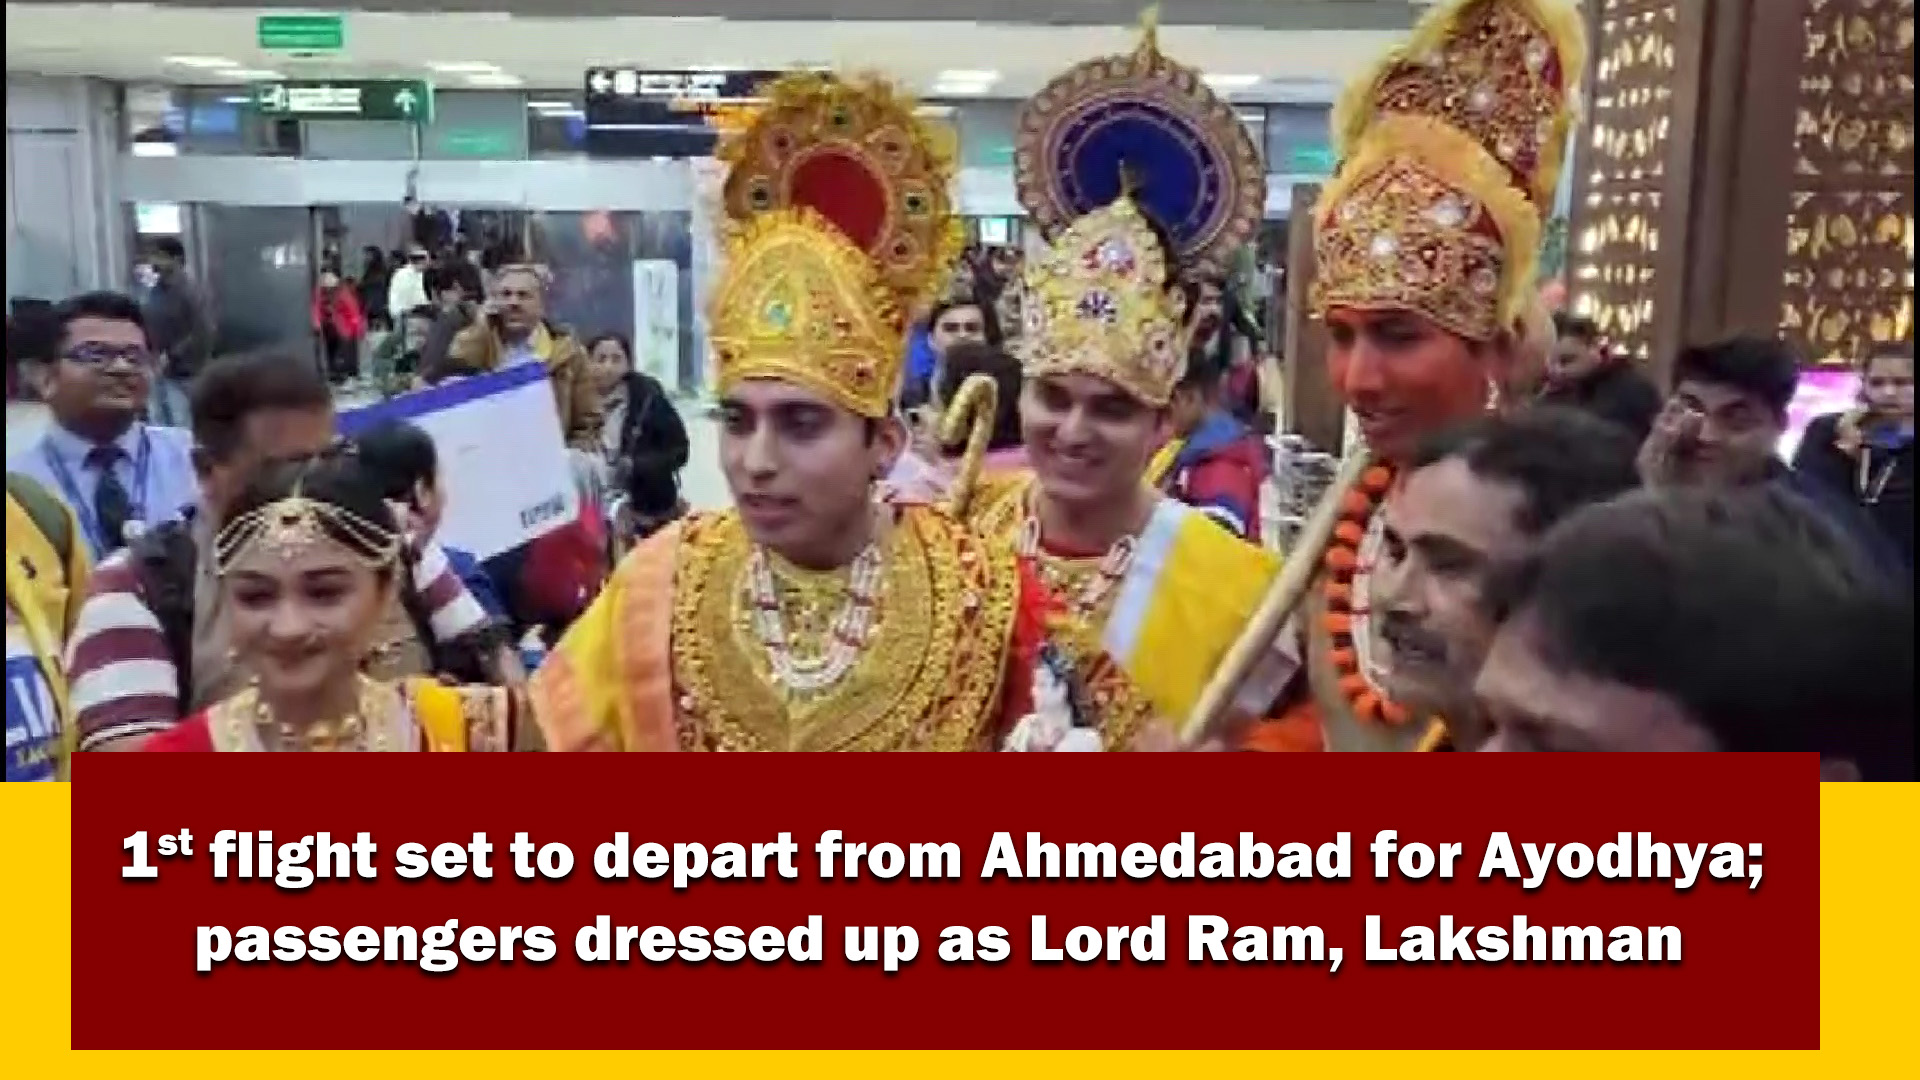 1st flight set to depart from Ahmedabad for Ayodhya; passengers dressed up as Lord Ram, Lakshman